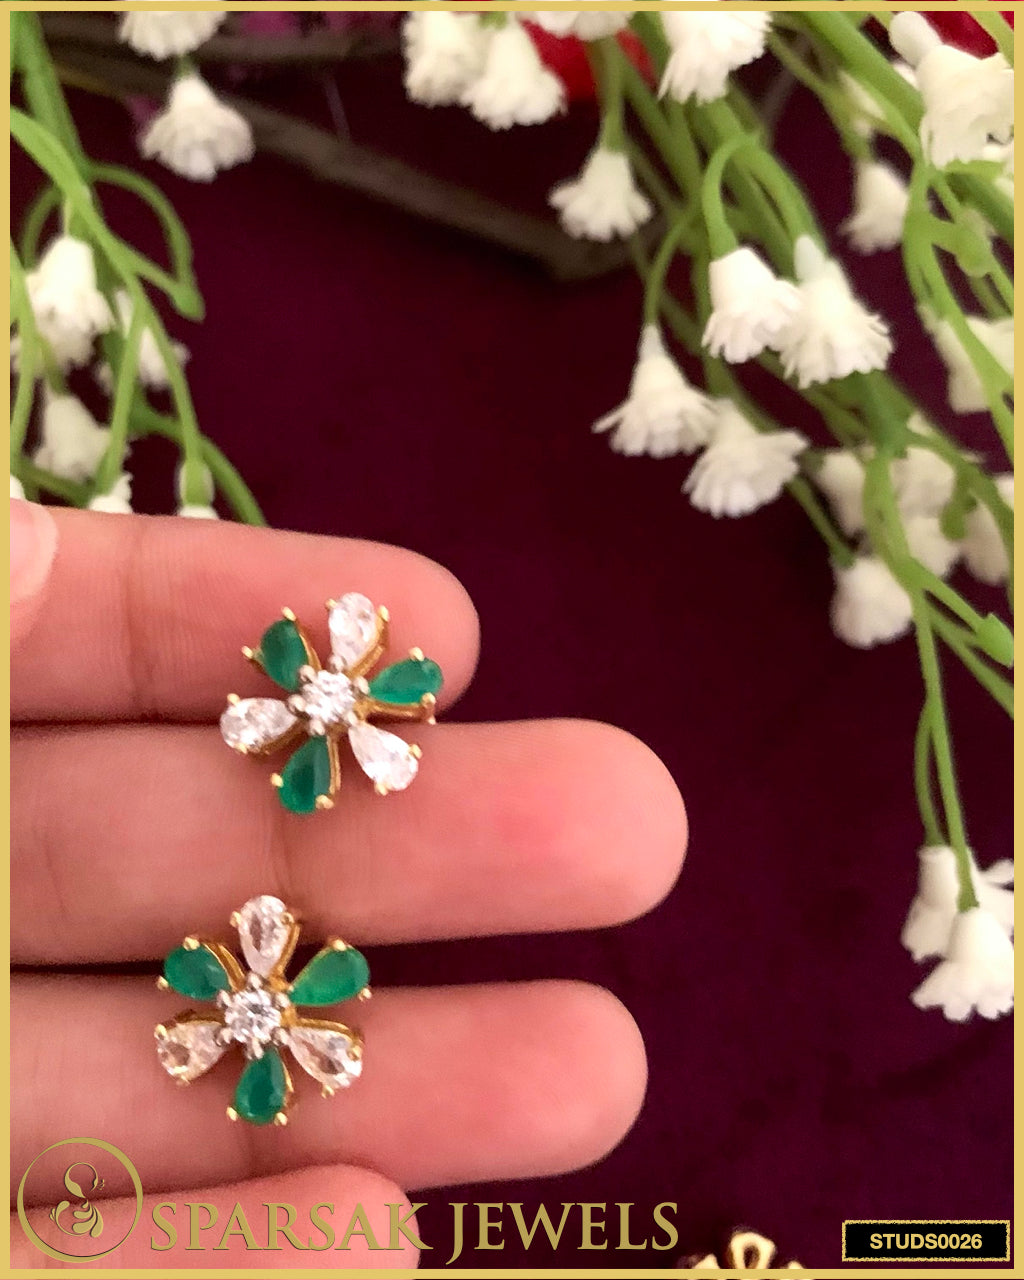 Gold Polished Flower Silver Studs with Cubic Zirconia and Emeralds - Nature-inspired Elegance by Sparsak Jewels